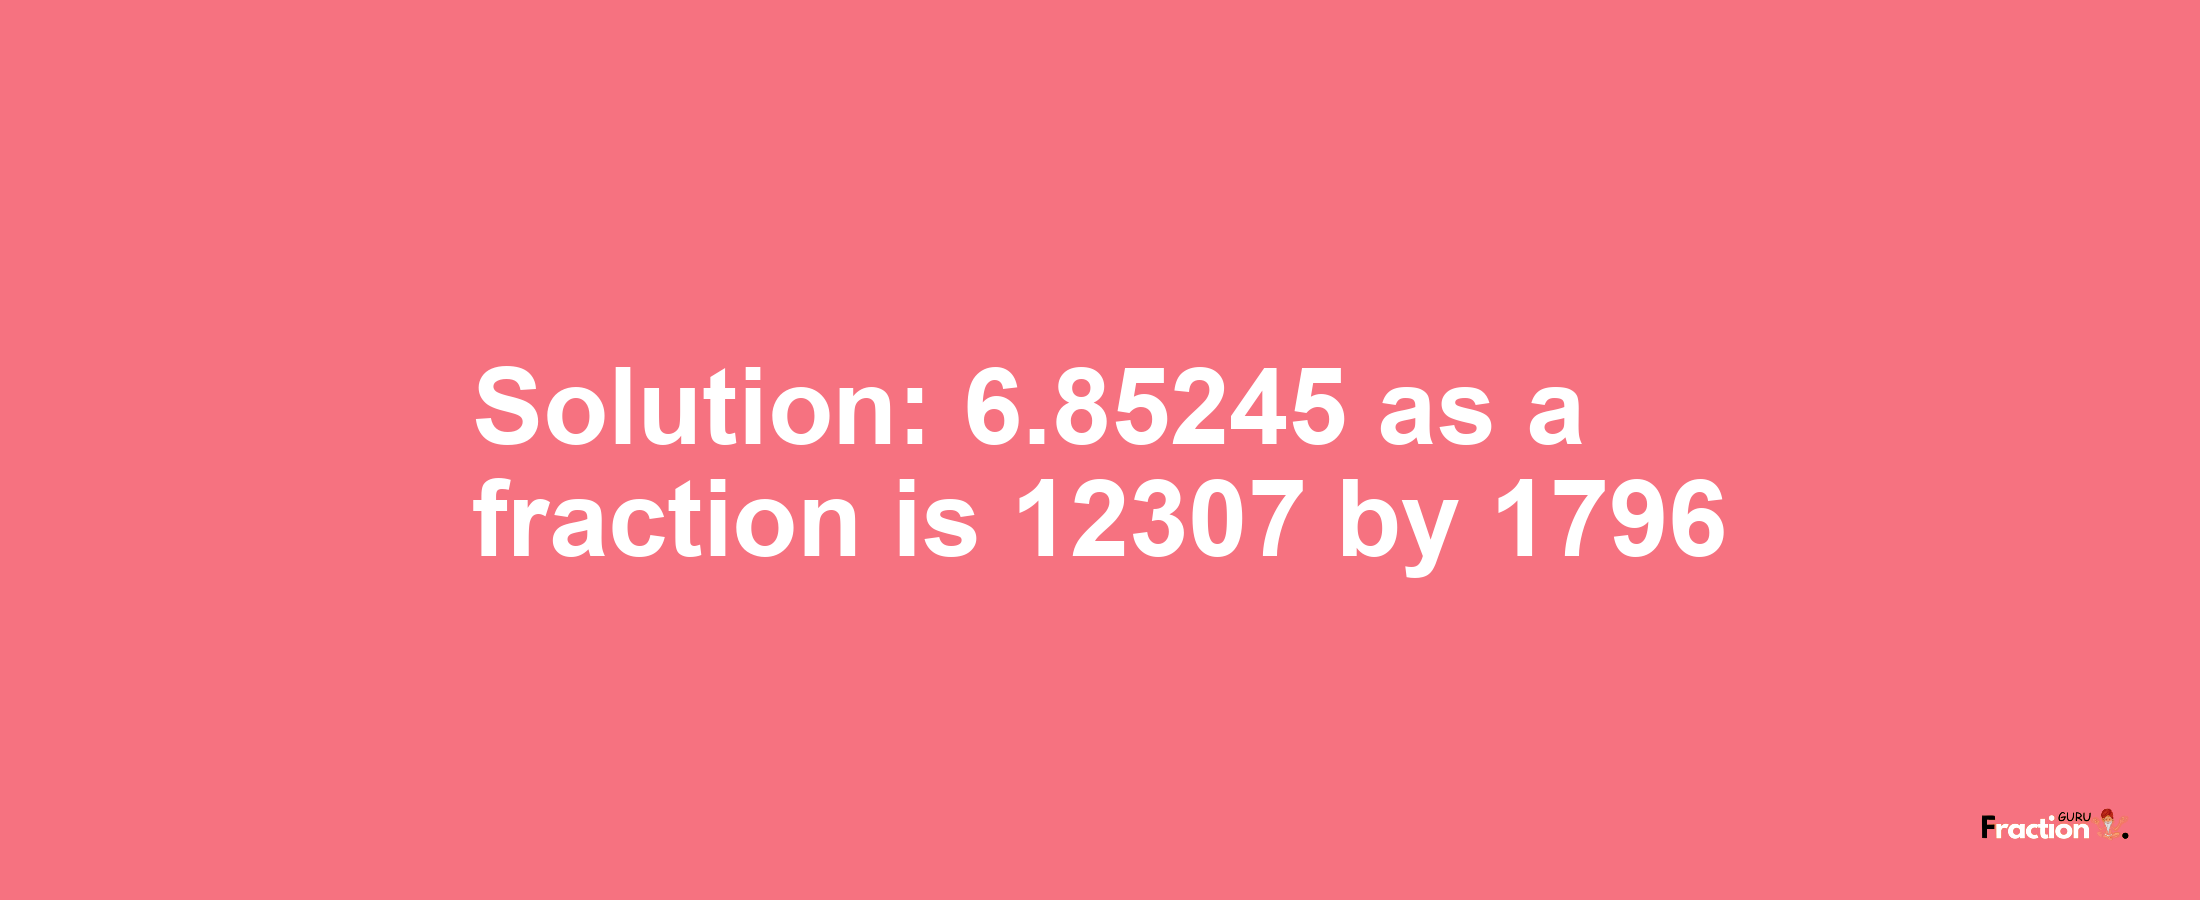 Solution:6.85245 as a fraction is 12307/1796